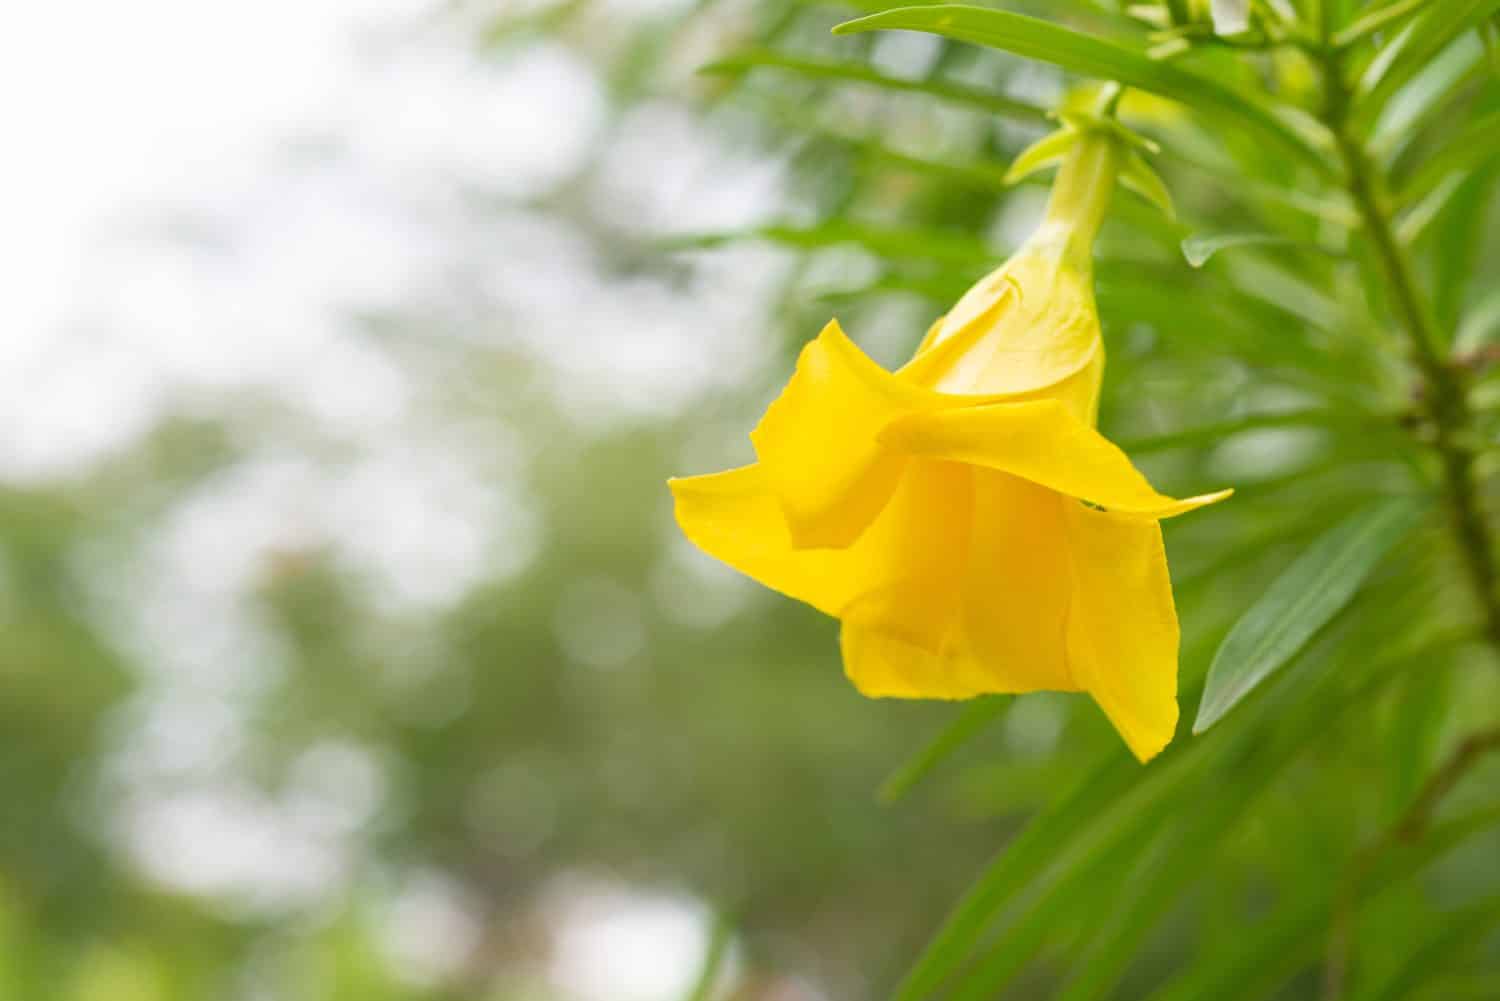 Trumpet flower or Yellow Oleander (Thevetia peruviana). Beautiful flower blooming in sunny garden, botanical nature background. Vibrant tropical blossom in full bloom on nature background